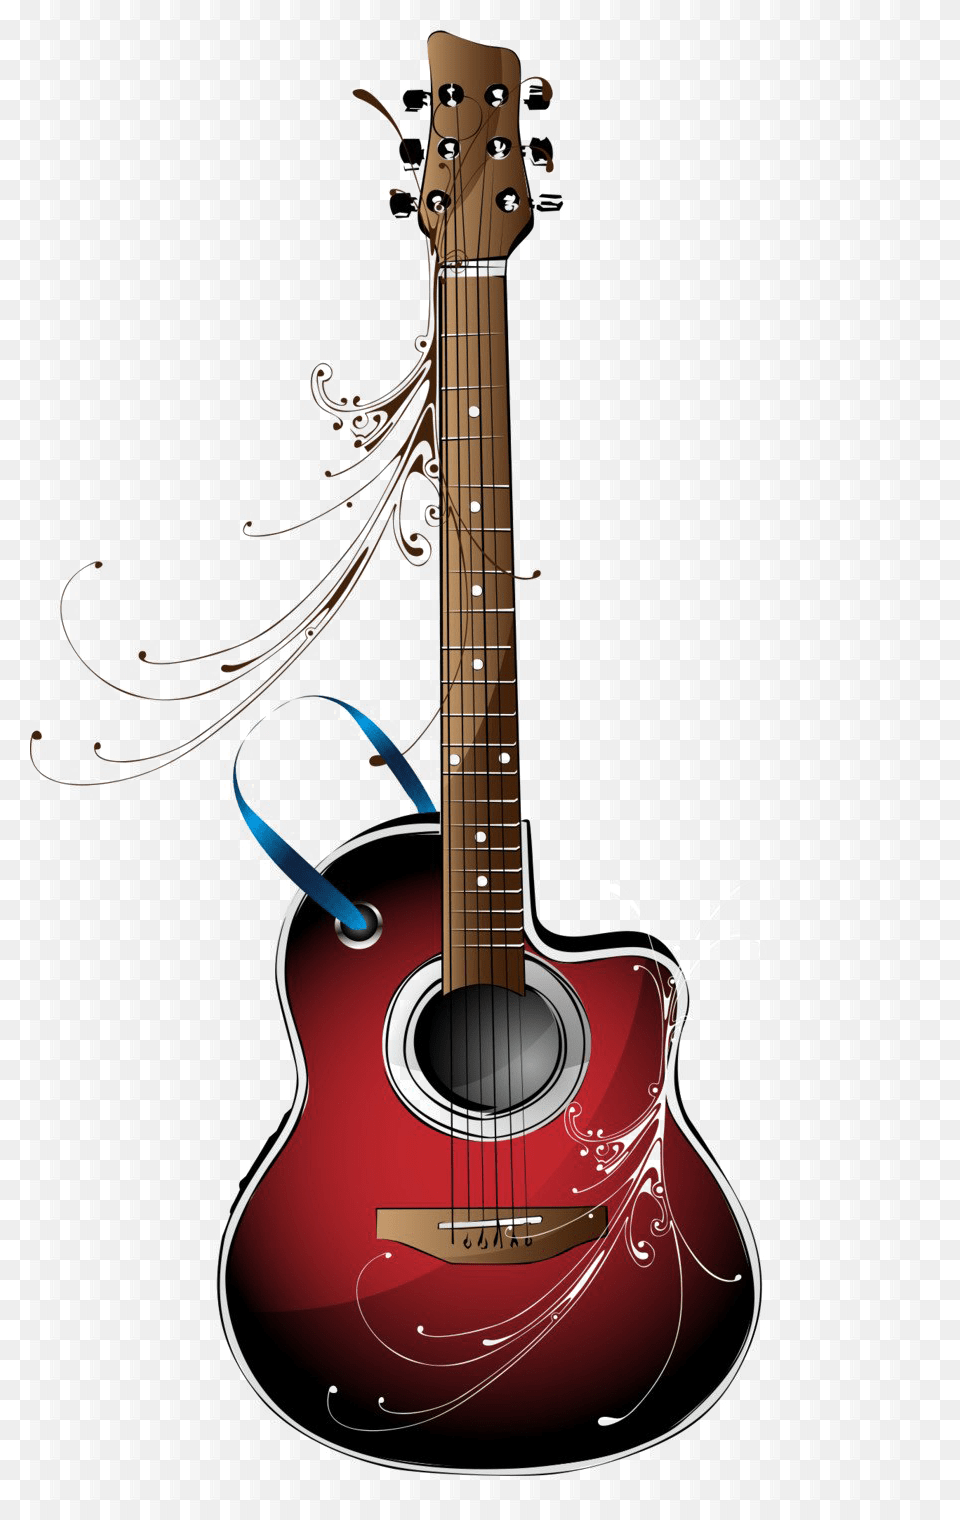 Red Electric Guitar Download Red Electric Guitar, Musical Instrument, Bass Guitar Png Image